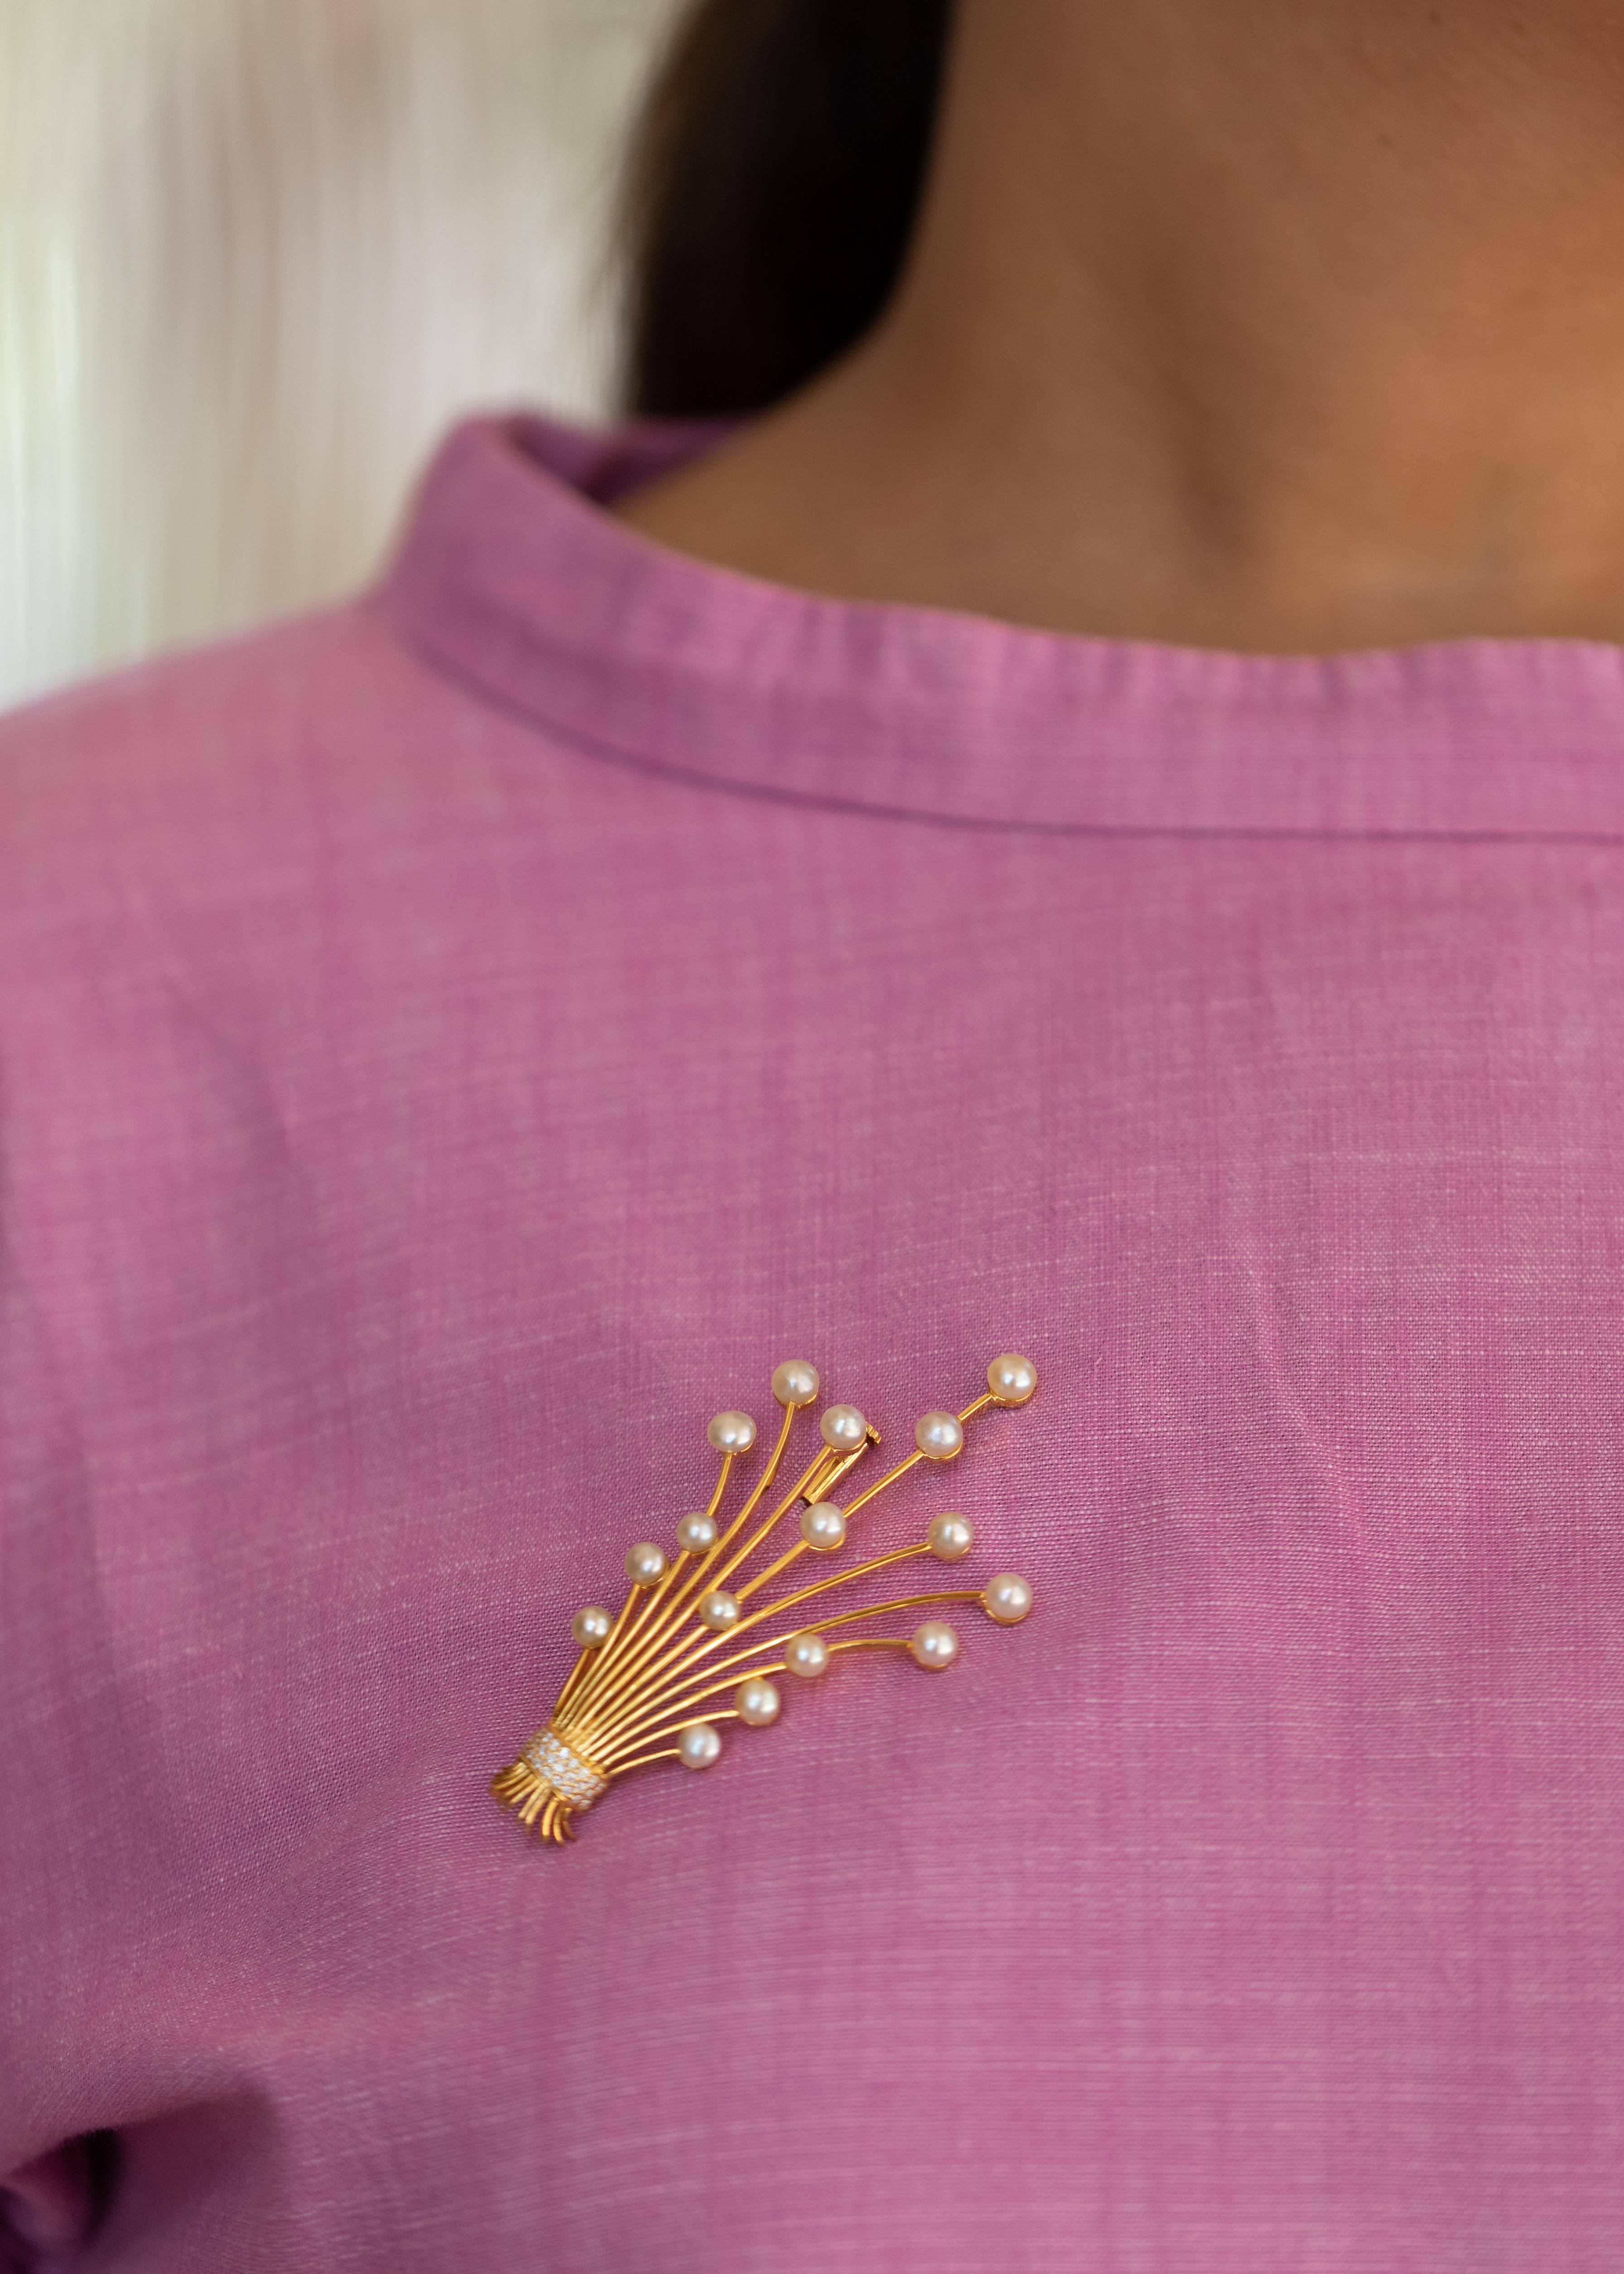 Yellow gold stems, natural Bahraini pearl flowers and a diamonds string...
This bouquet is a showstopper, it is a wearable piece of art.
The brooch is designed and handcrafted in Bahrain.

The pearls are certified from the top rated pearl testing